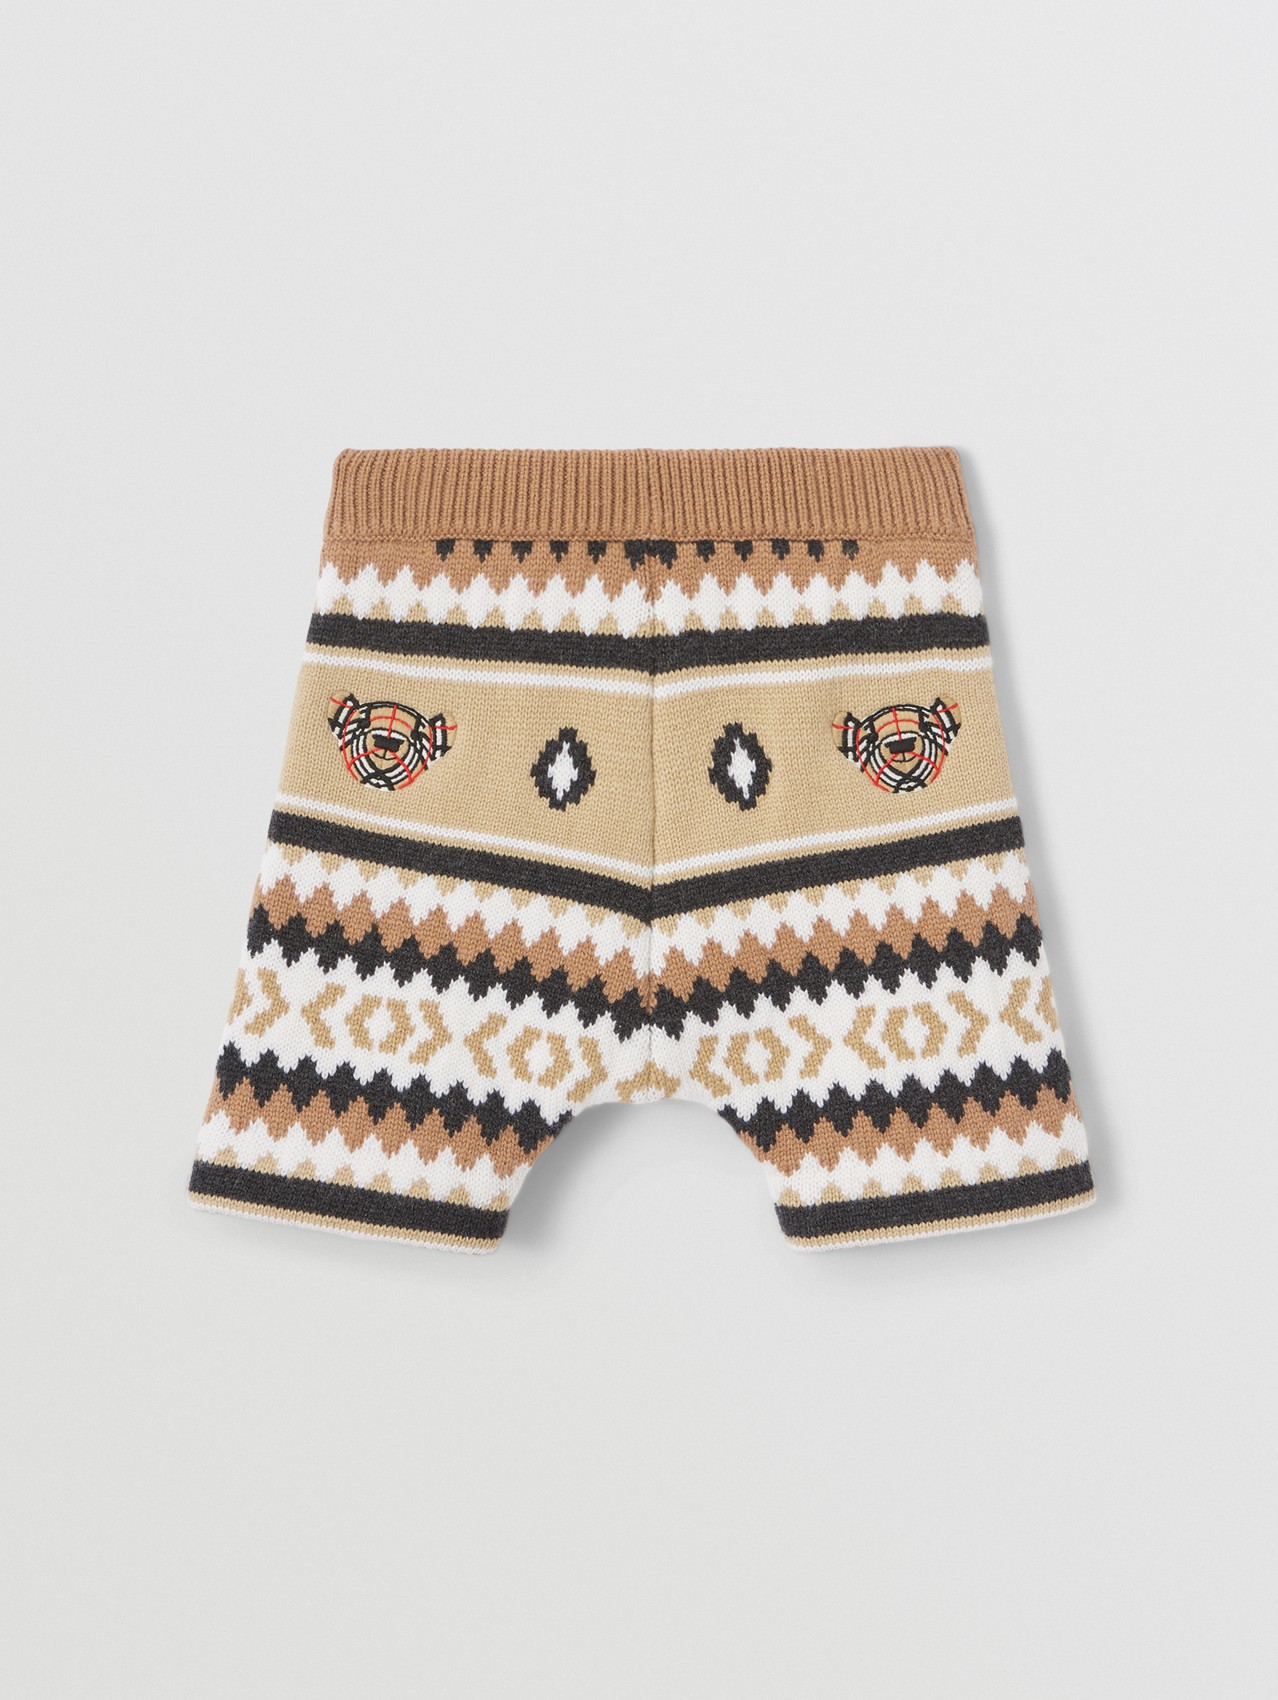 Fair Isle Wool Cashmere Shorts in Camel